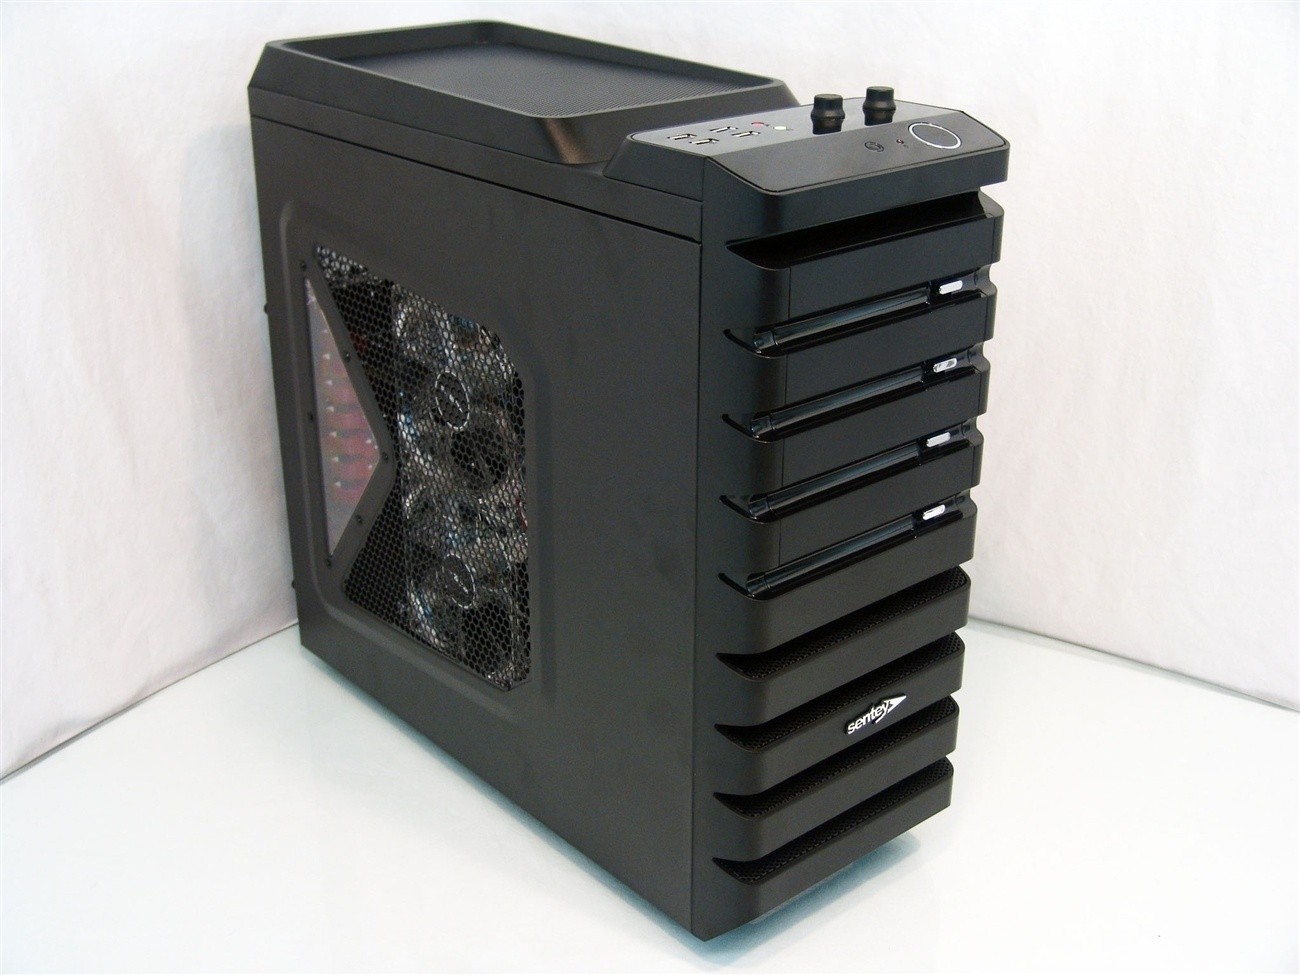 Sentey GS-6070 II Abaddom Mid-Tower Chassis Review